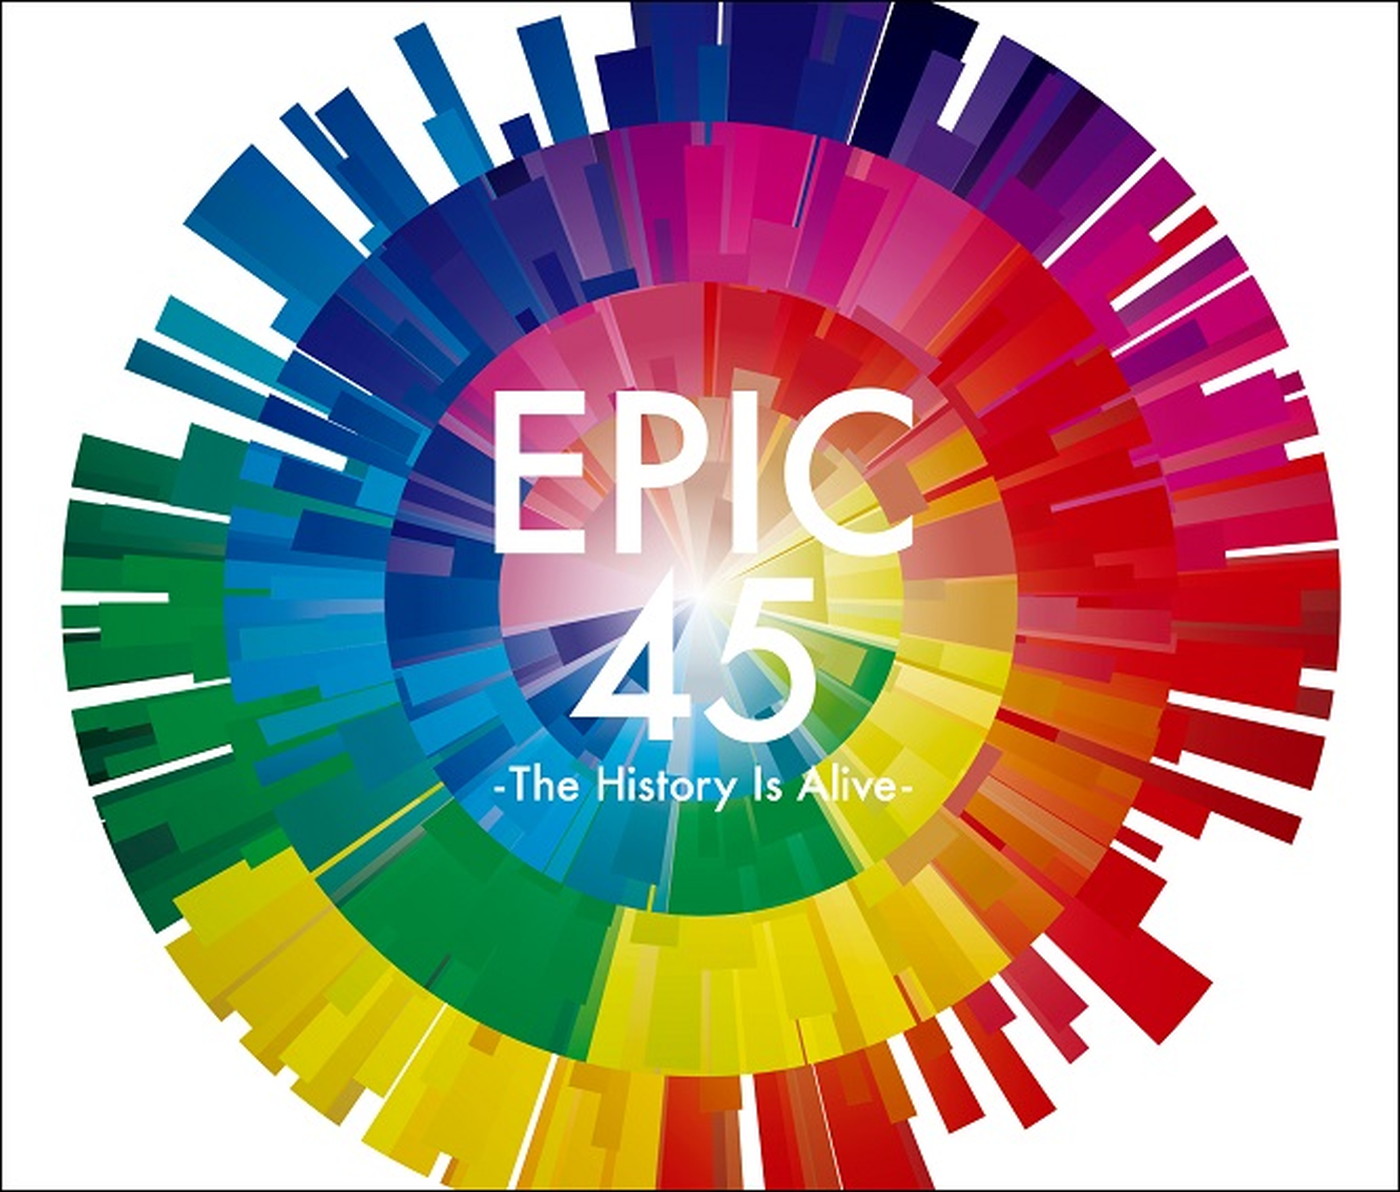 EPICレーベルの45年を彩った45曲を収録した3枚組コンピ『EPIC 45 -The History Is Alive-』リリース - 画像一覧（1/1）